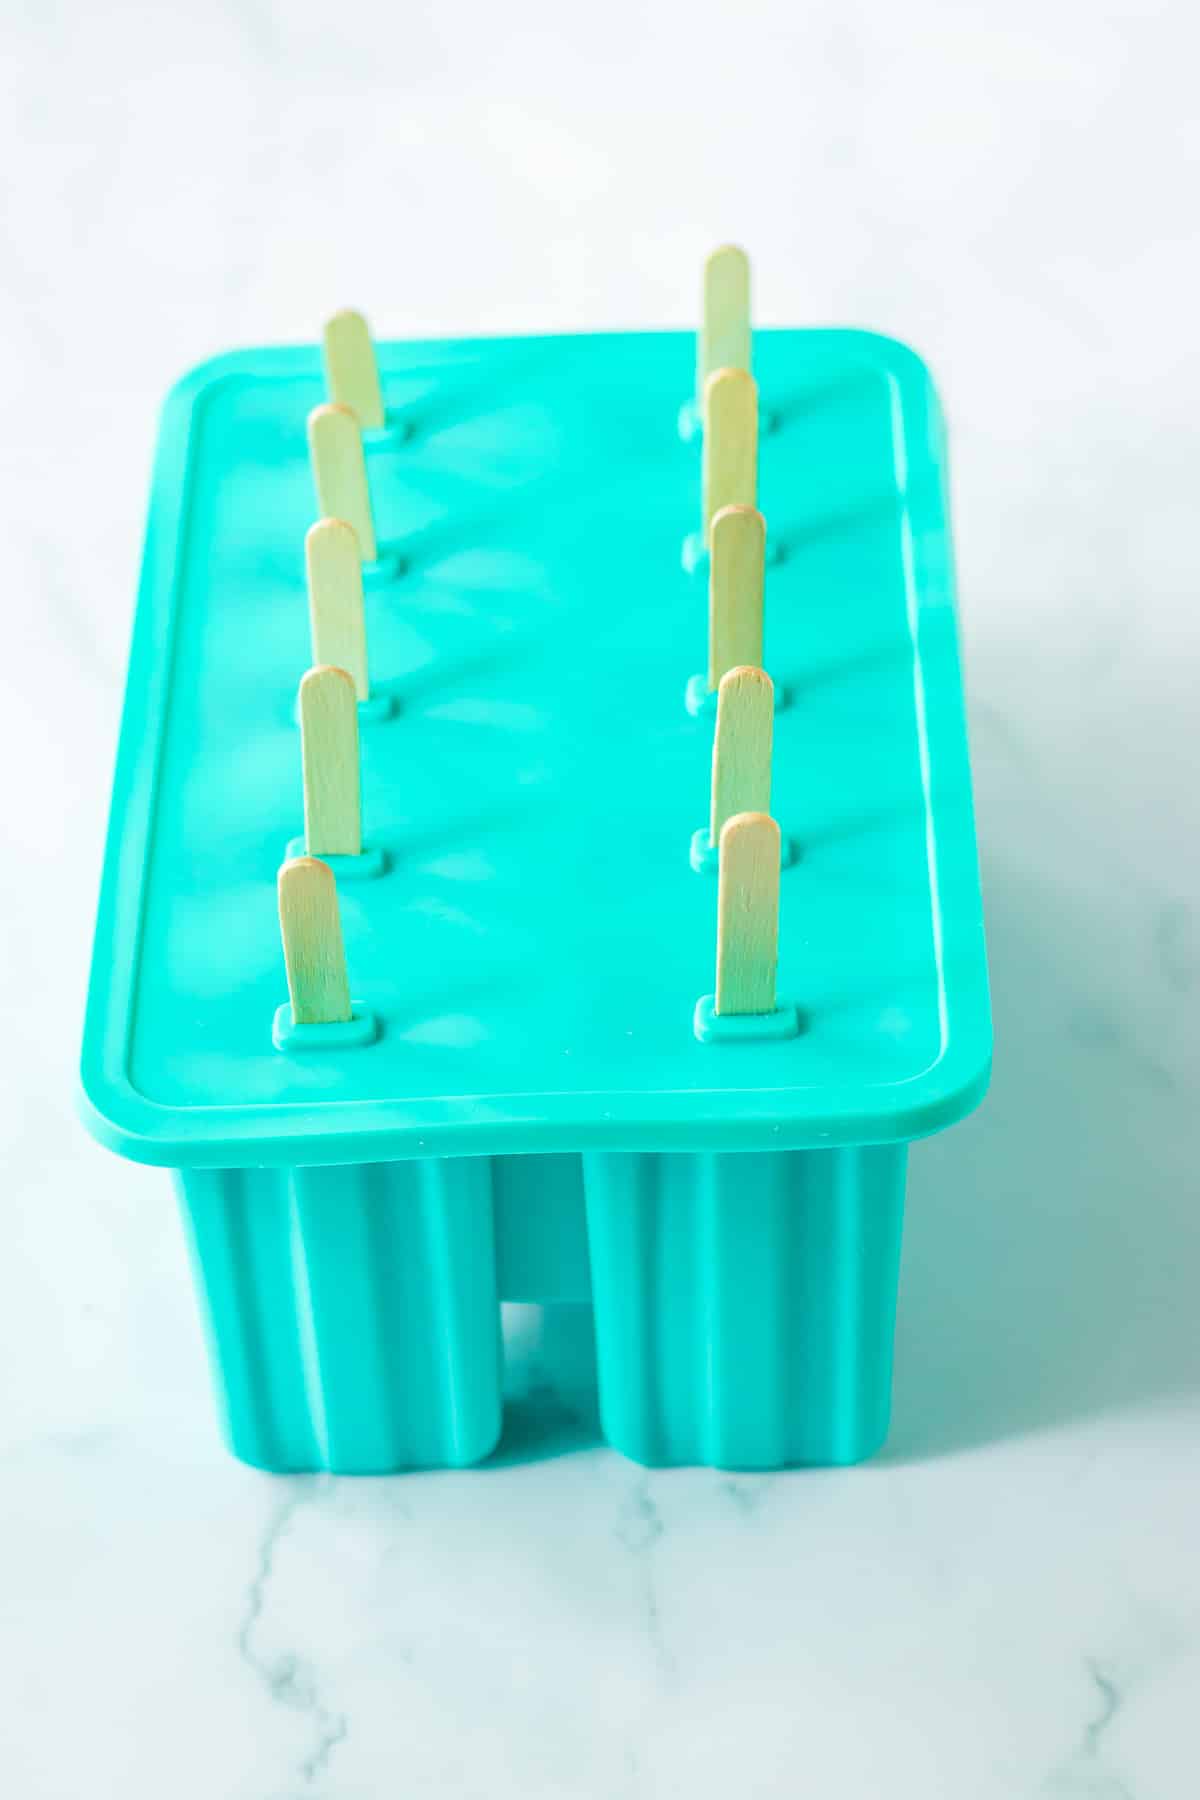 Silicone popsicle molds closed with a stick in each spot for the popsicle.